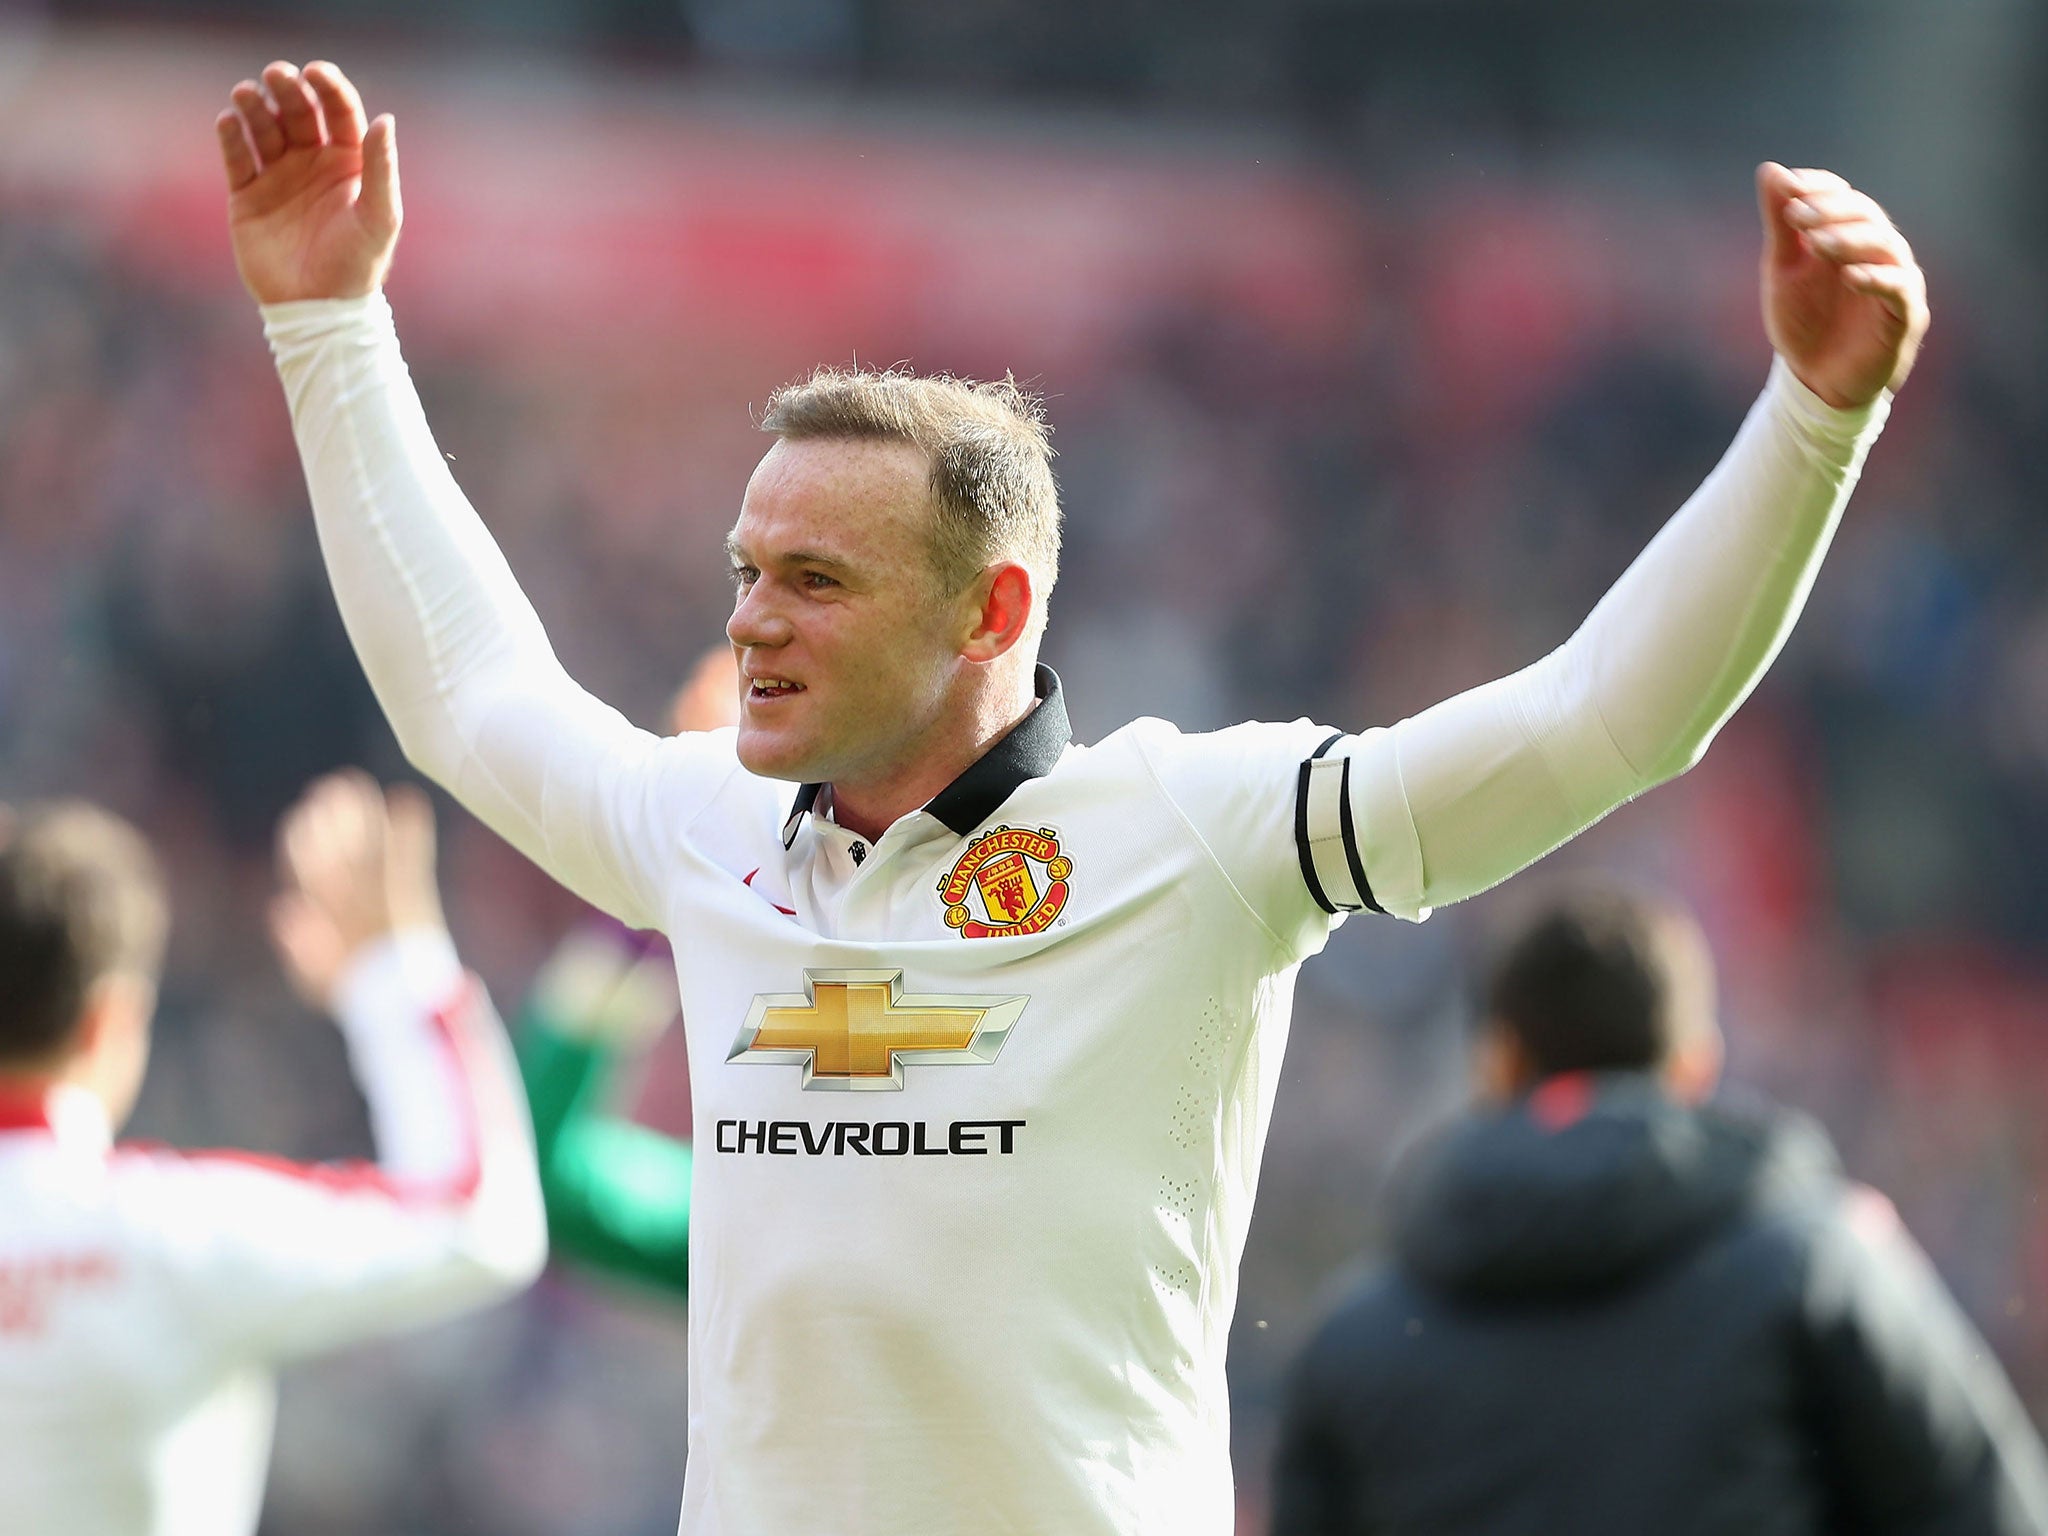 Wayne Rooney apparently swears at Manchester United' Spanish players to fire them up